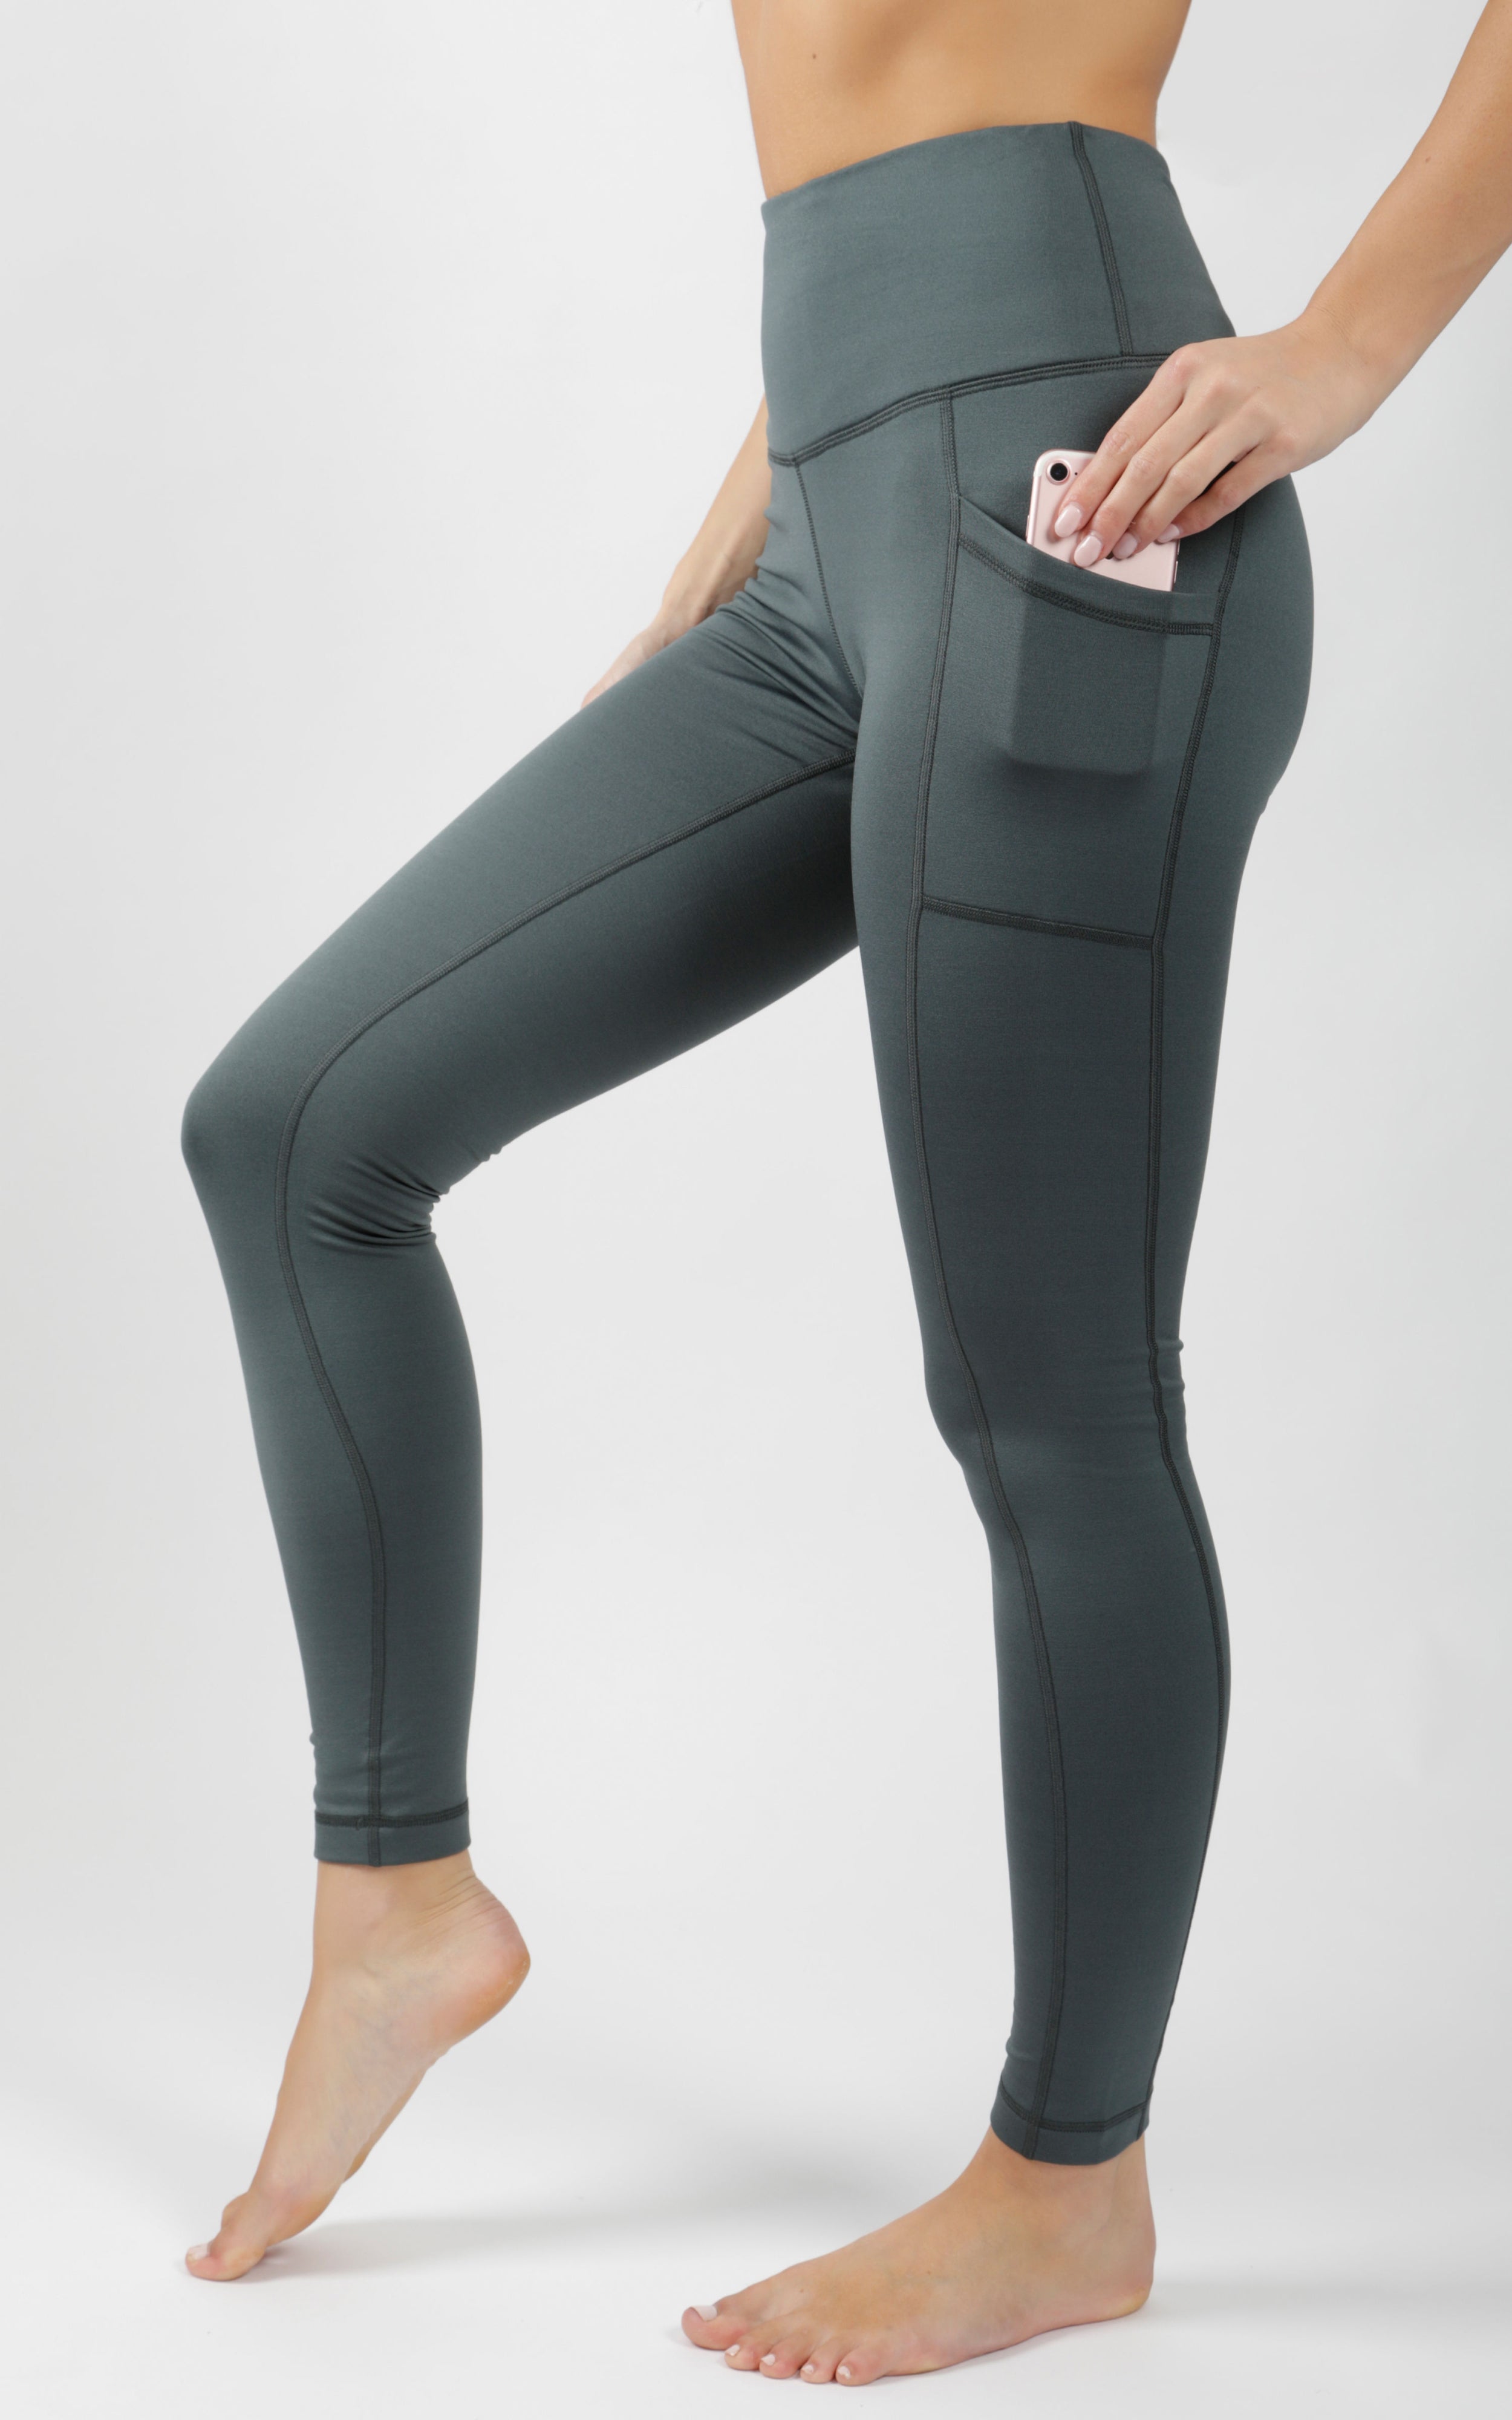 Cold Gear High Waist Fleece Lined Legging with Side Pockets